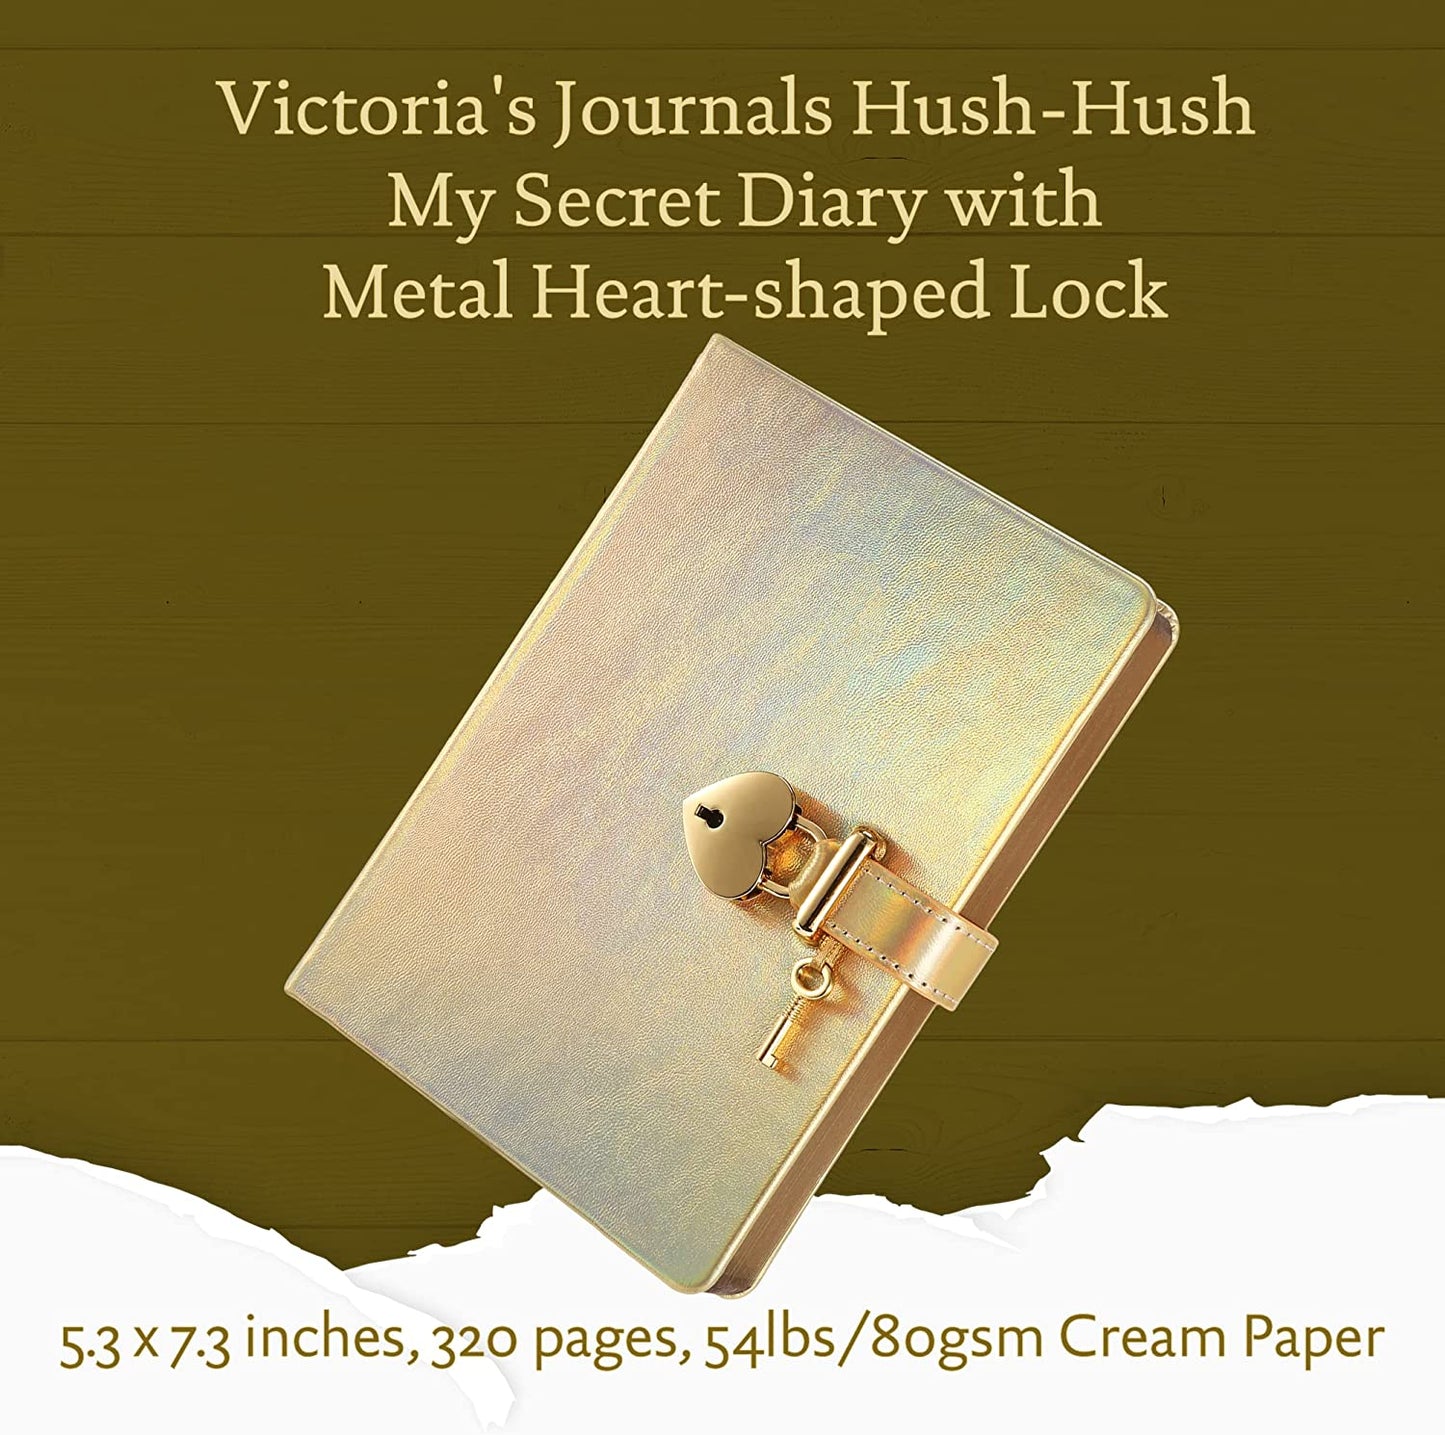 Heart Shaped Lock Journal, Lock Diary for Girls with Key, Vegan Leather Cover, Cute Locking Secret Notebook for Teens, 5.3x7.3",320p Victoria's Journals Secret Diary, College-ruled (Iridescent Gold)